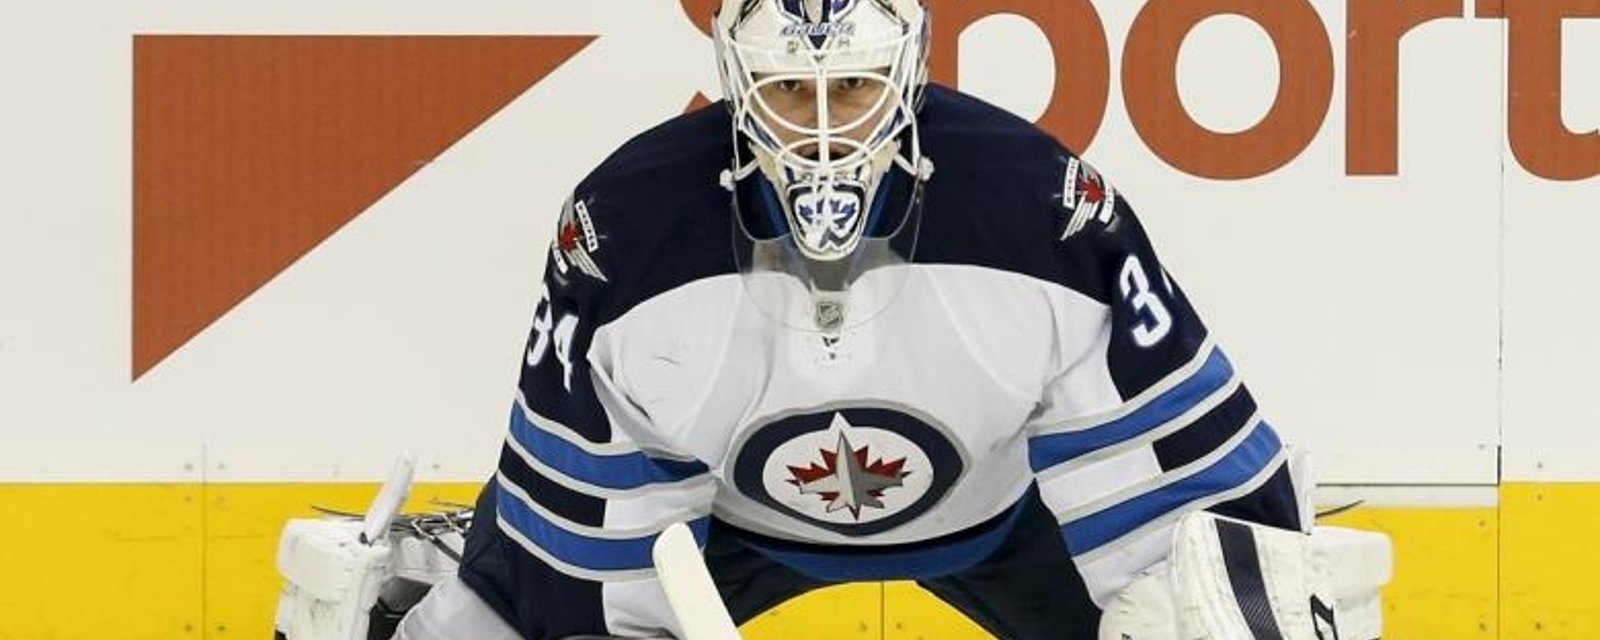 Jets announce minor signing in goal on Tuesday.